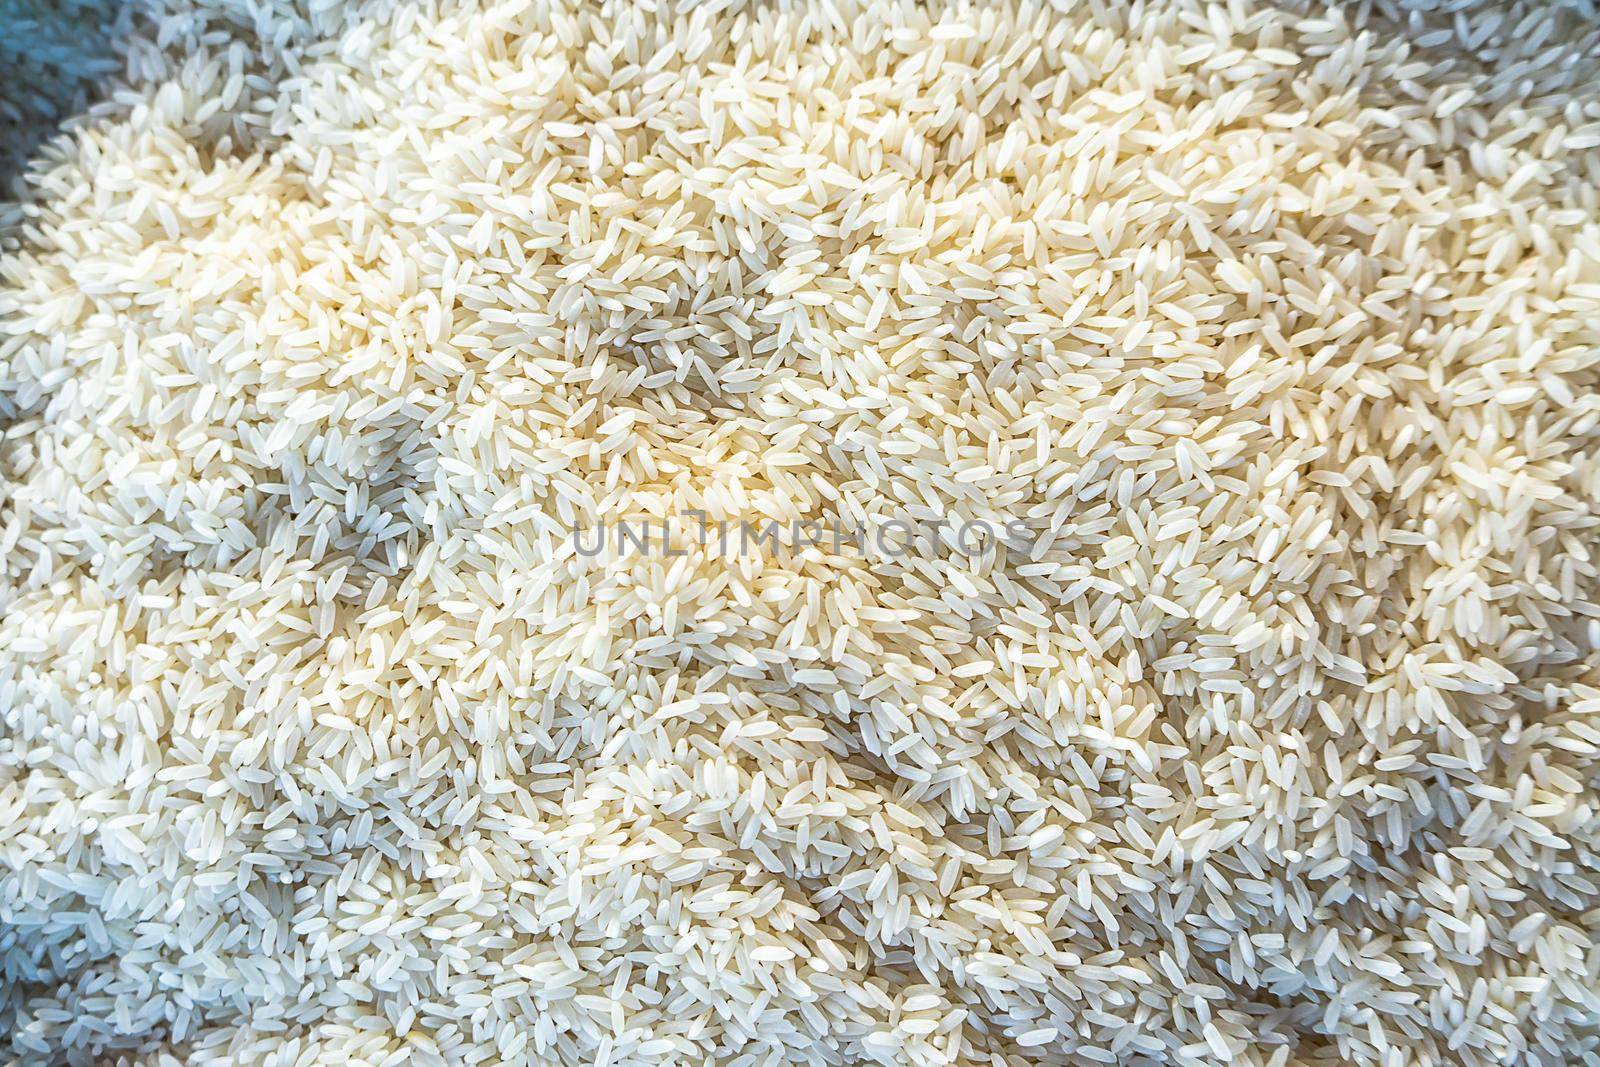 Top view of white rice photo style for wallpaper or texture by cfalvarez